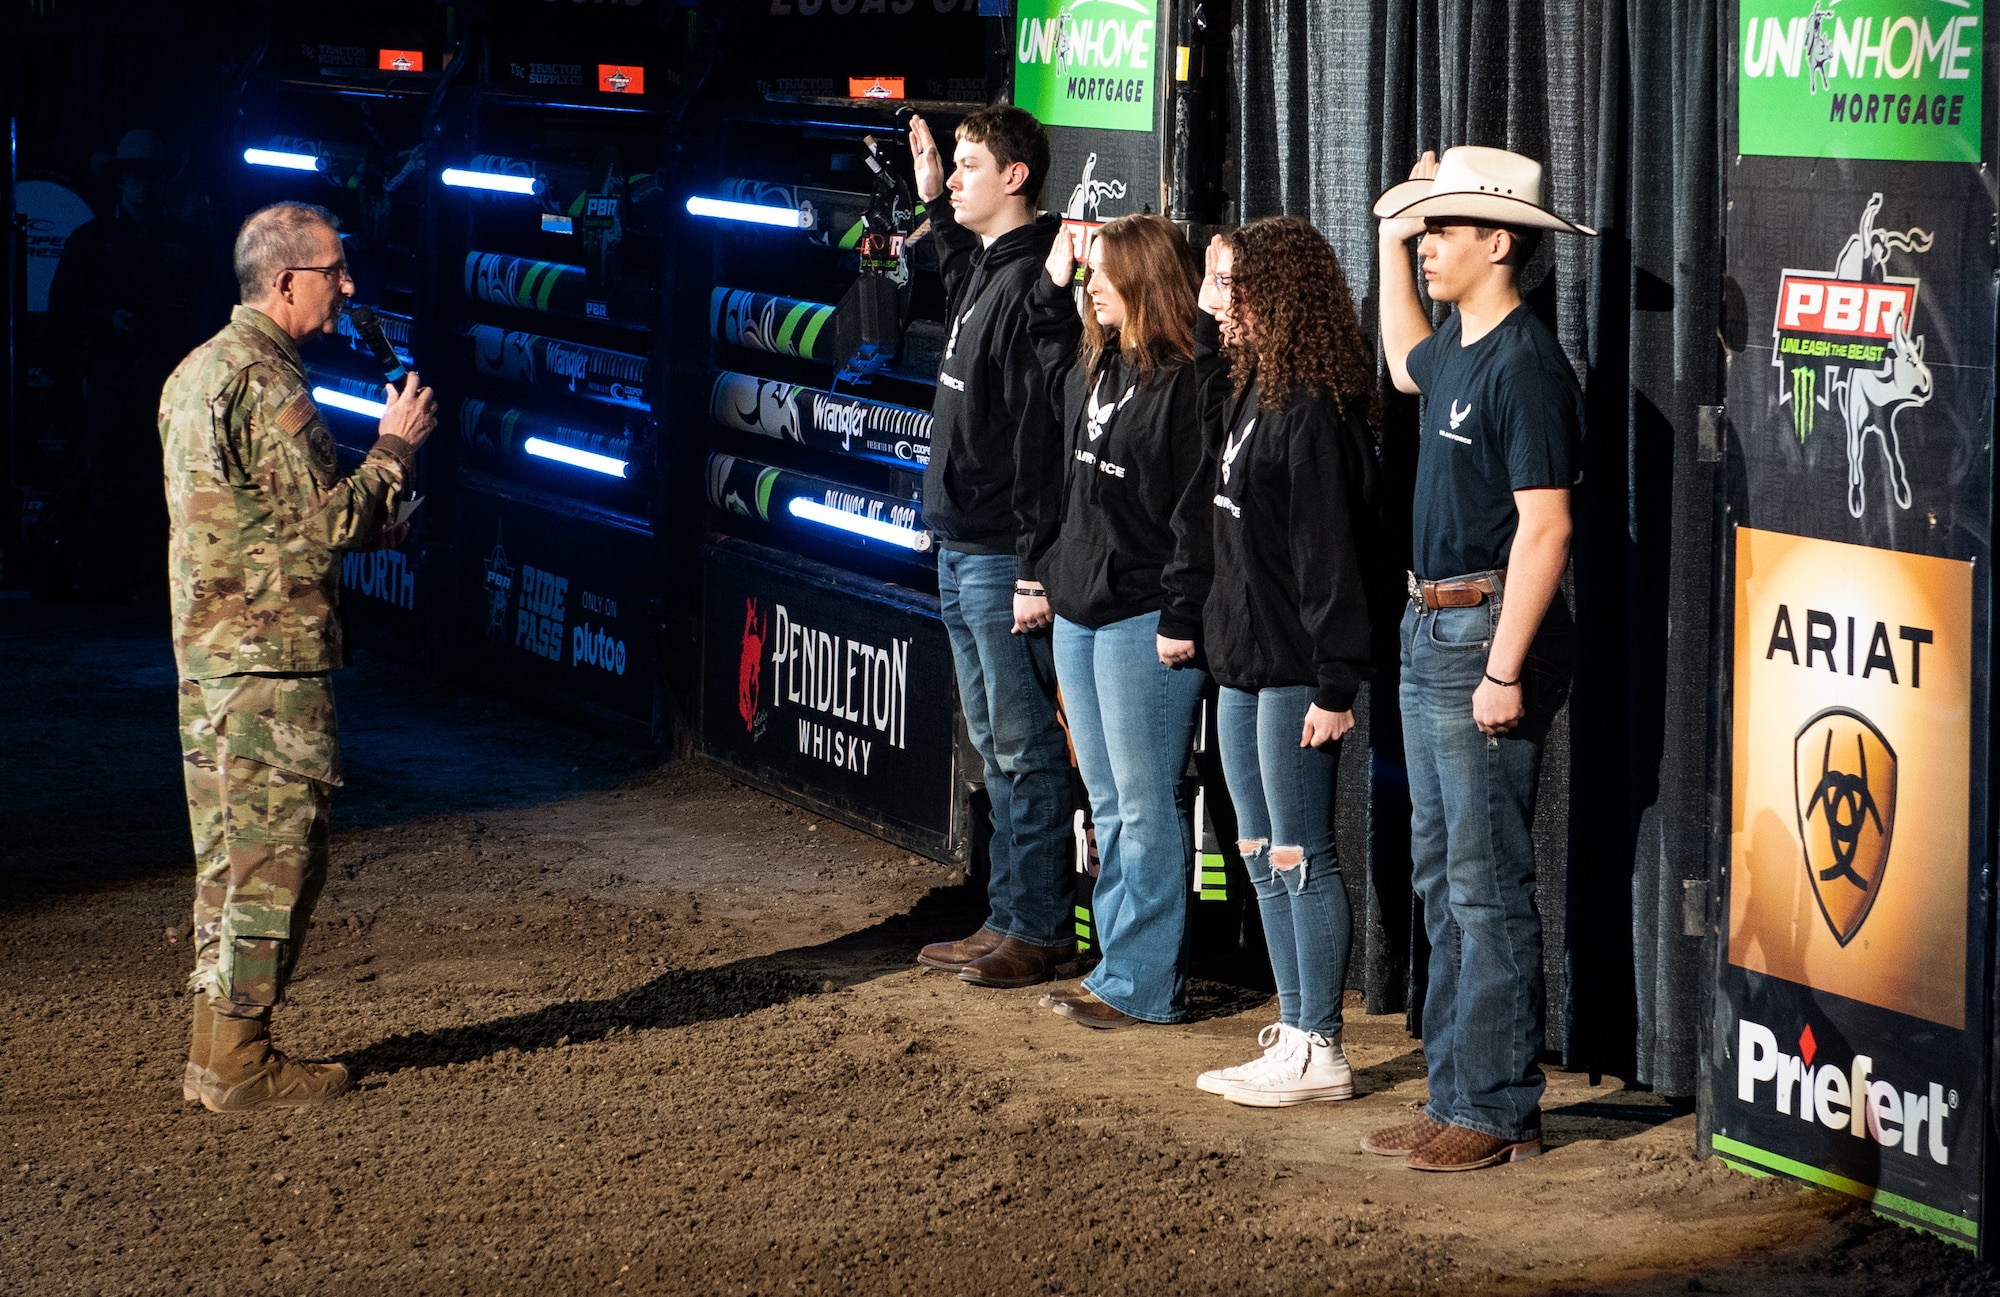 Brig. Gen. Thomas Mora, Montana Air National Guard director of staff, issues the Oath of Enlistment to 4 delayed enlistment program applicants in front of the crowd at the Professional Bull Riders event “Unleash The Beast’s Cooper Tires Invitational” in Billings, Montana, April 15, 2023.